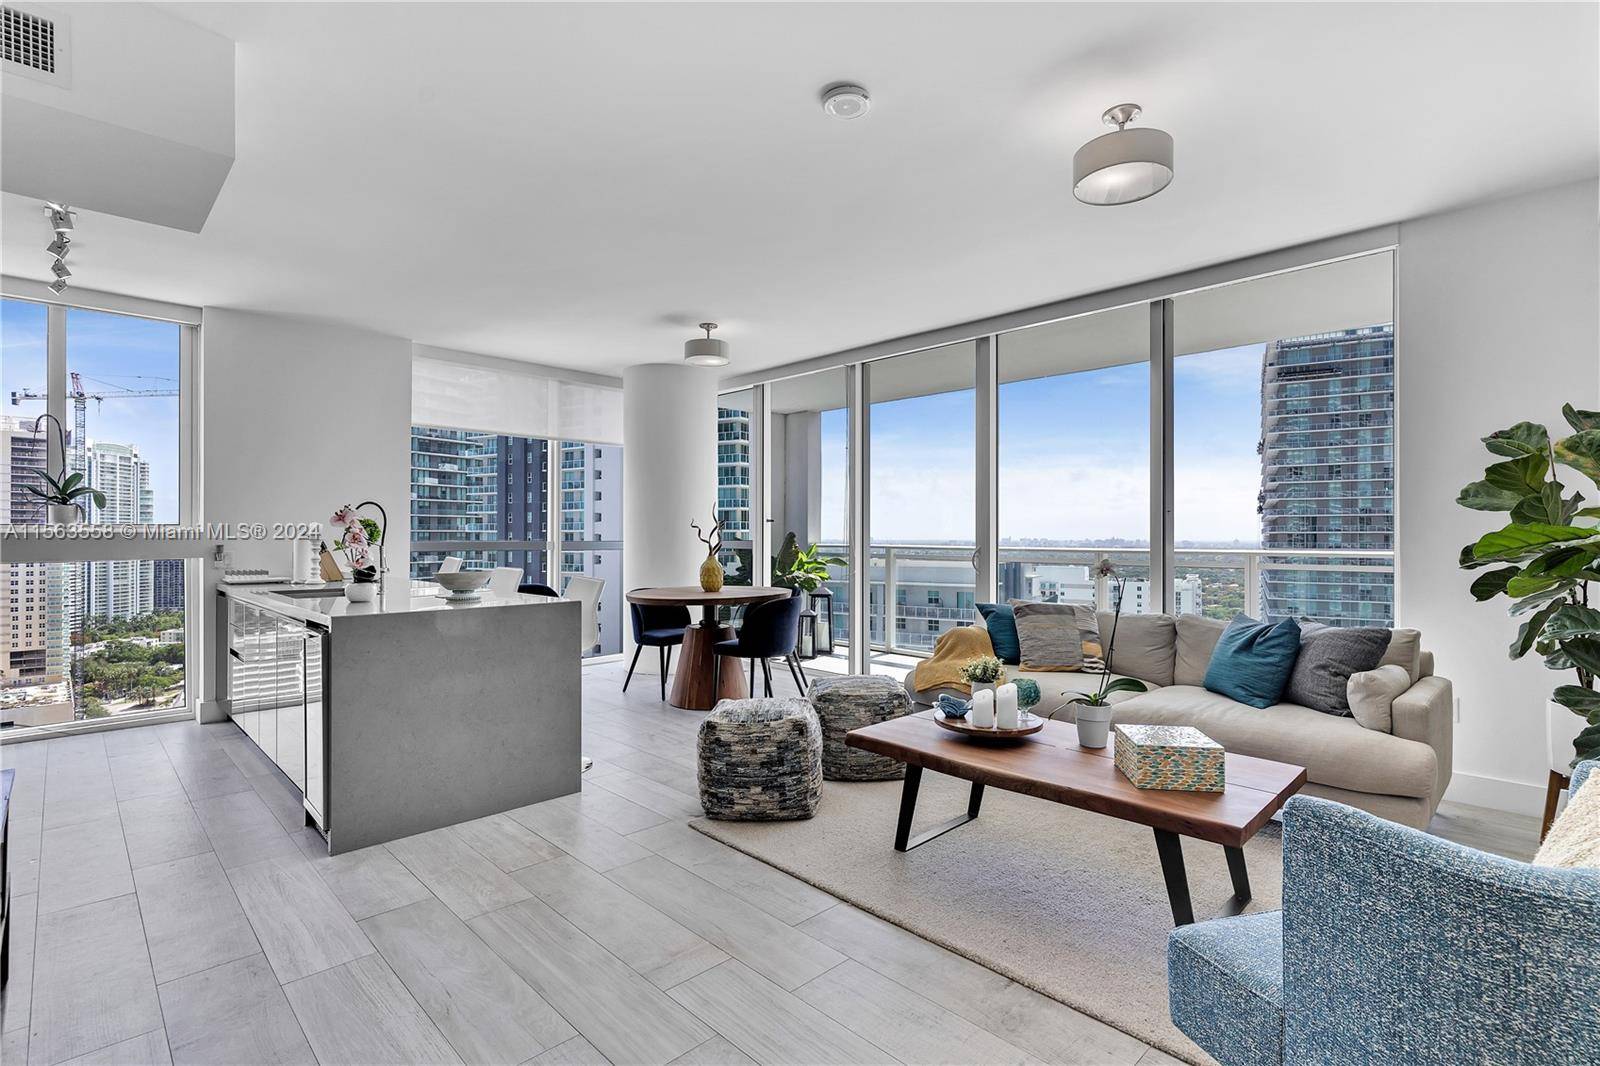 This modern furnished 2 bedrooms, 2 bathroom corner unit apartment located in the vibrant Brickell area offers stunning views of the sunset and Coral Gables.